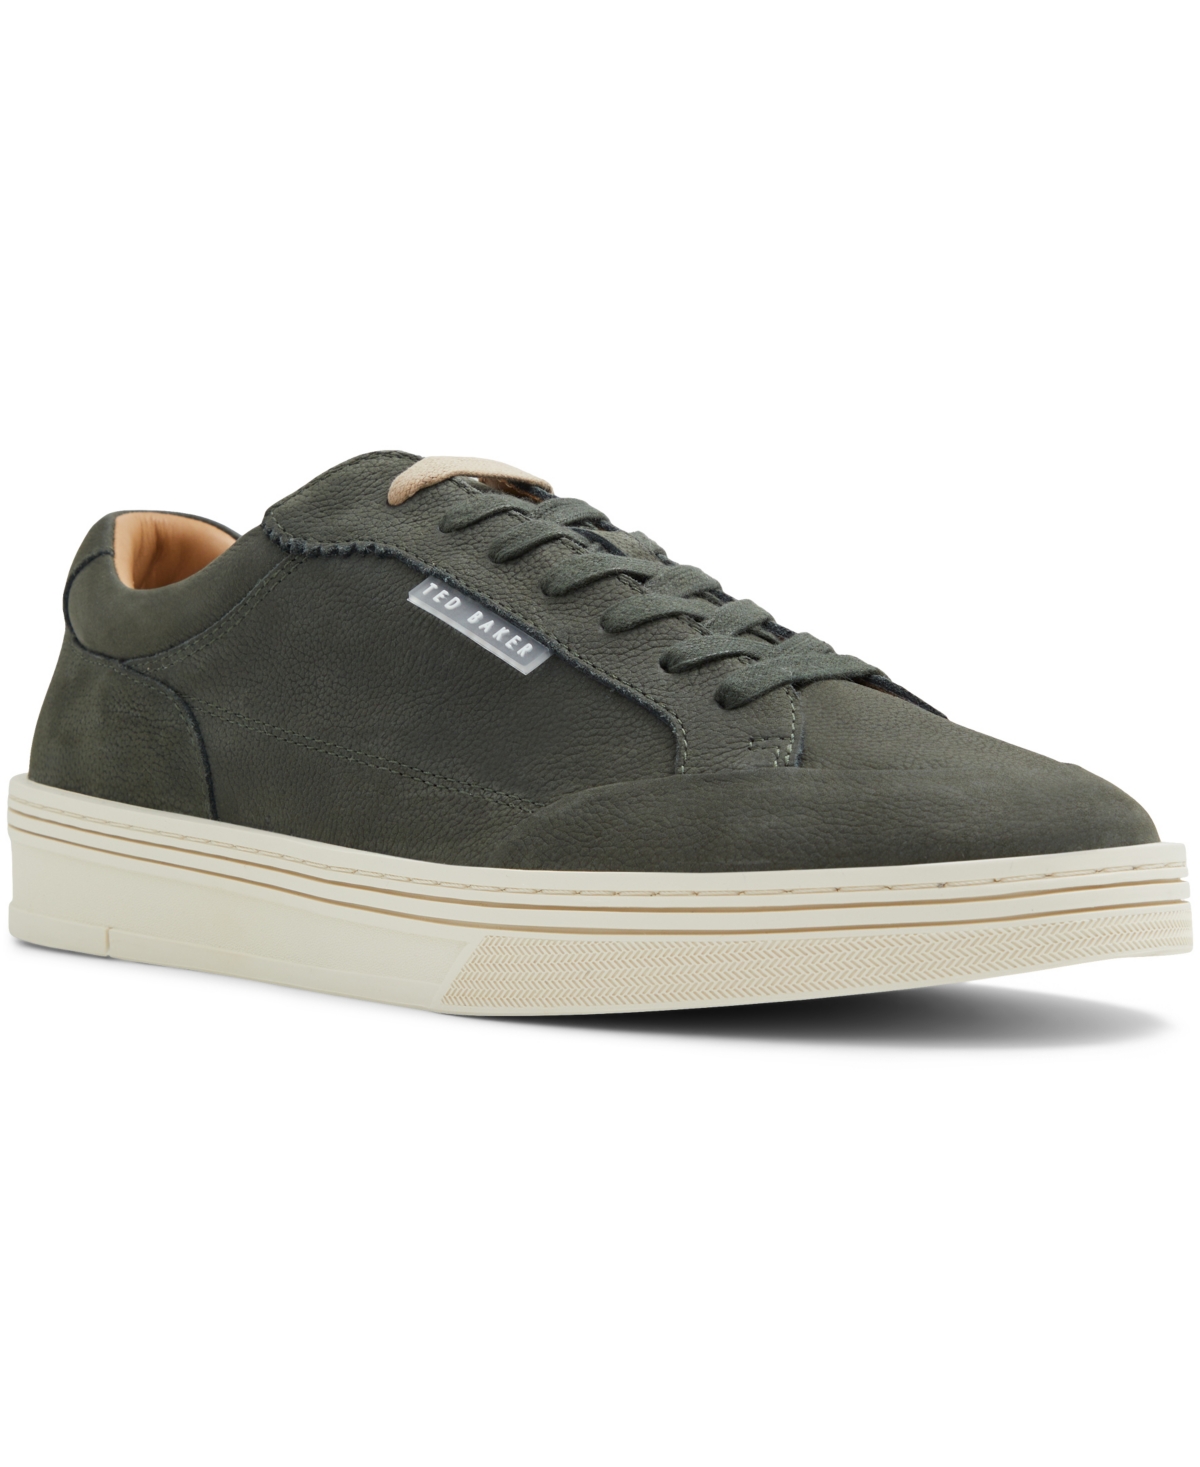 Men's Hampstead Lace Up Sneakers - Green